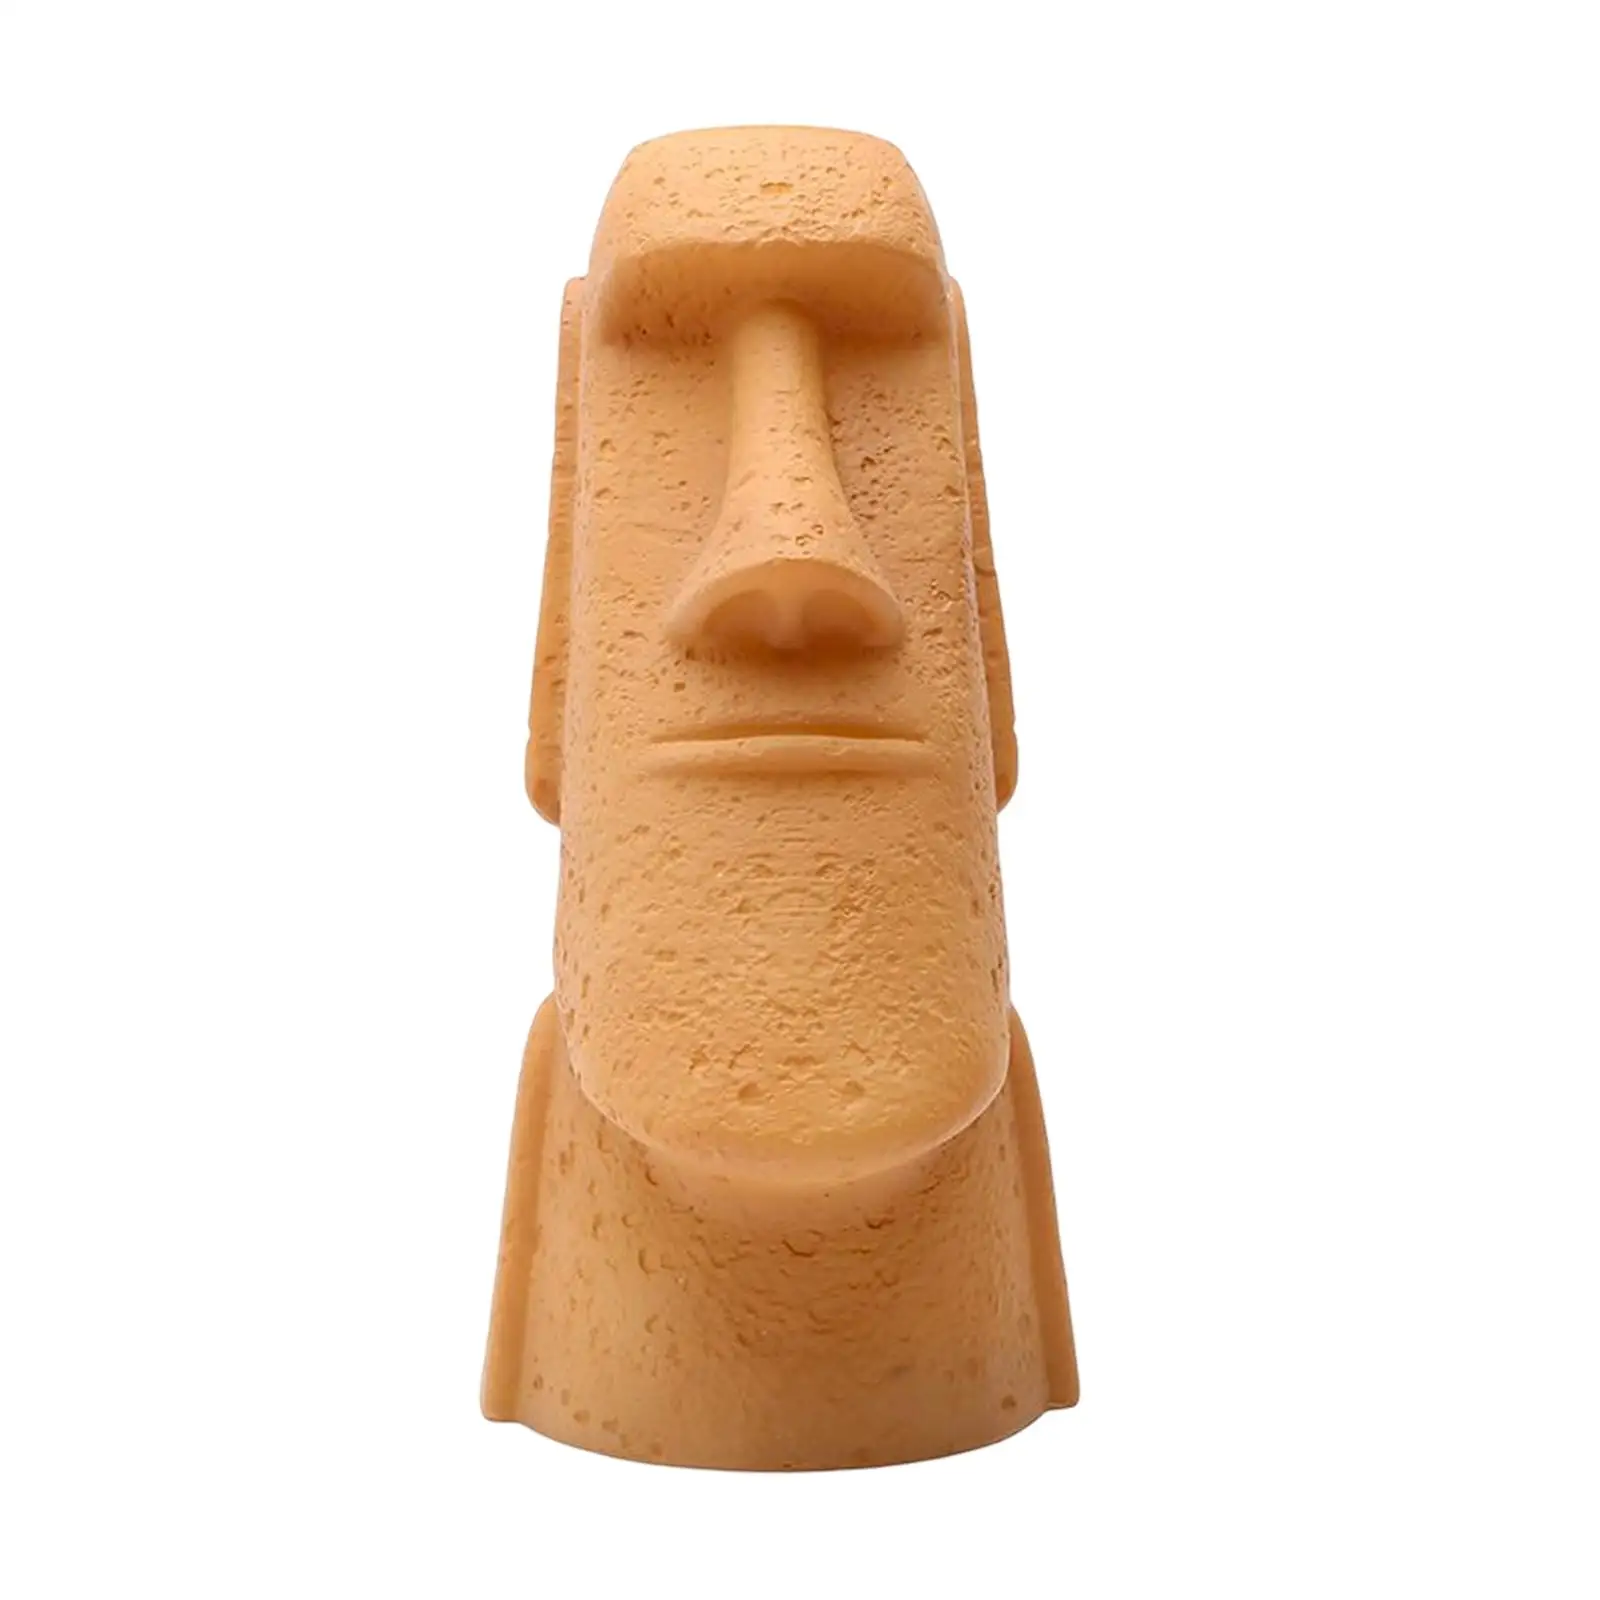 Easter Island Head Statue Light Lamp Resin Figurine Auto Off for Living Room